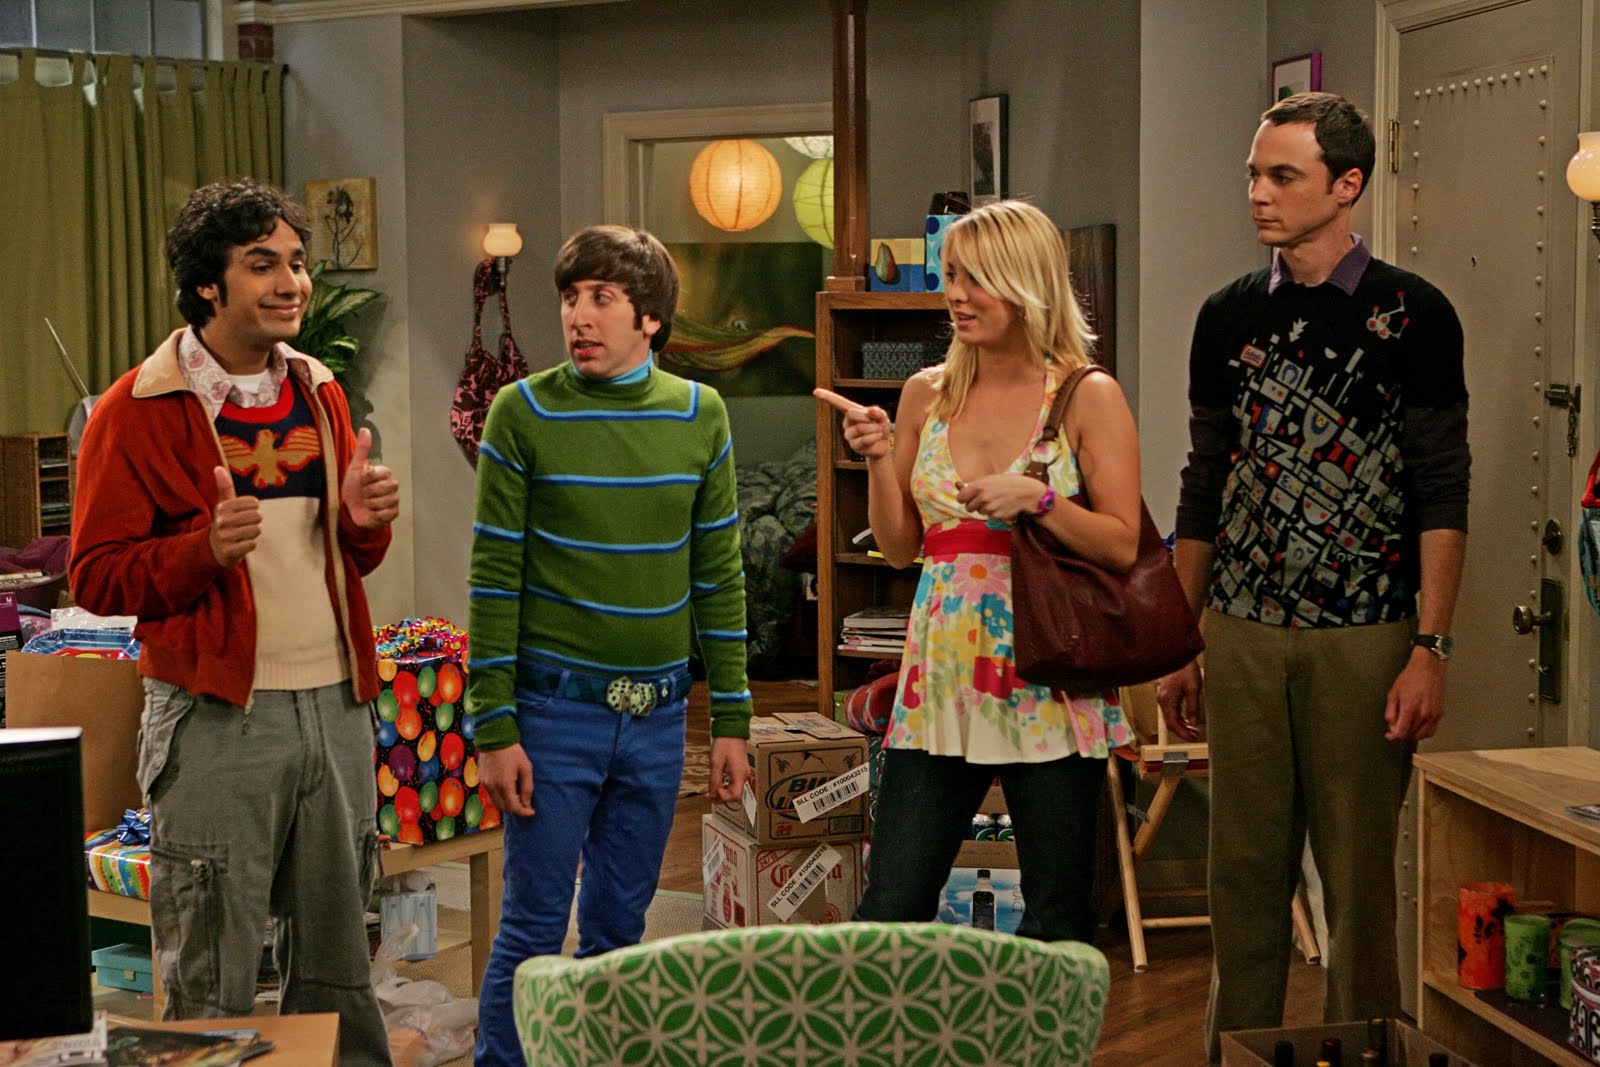 The Big Bang Theory Emmy Awards Nominee HD Wallpapers| HD Wallpapers ...